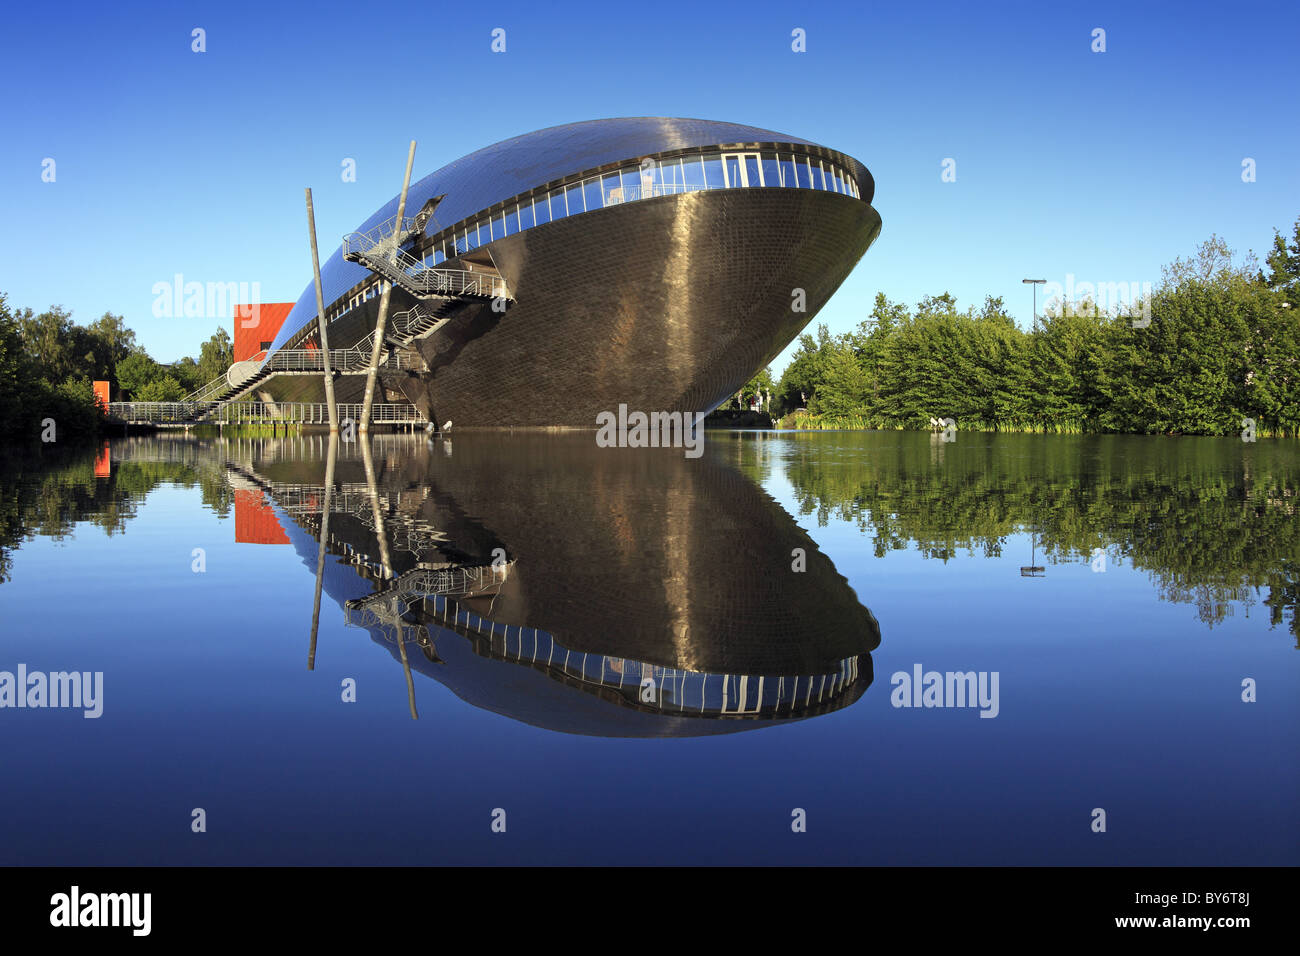 Science museum Universum at the river bank under blue sky, Hanseatic City of Bremen, Germany, Europe Stock Photo